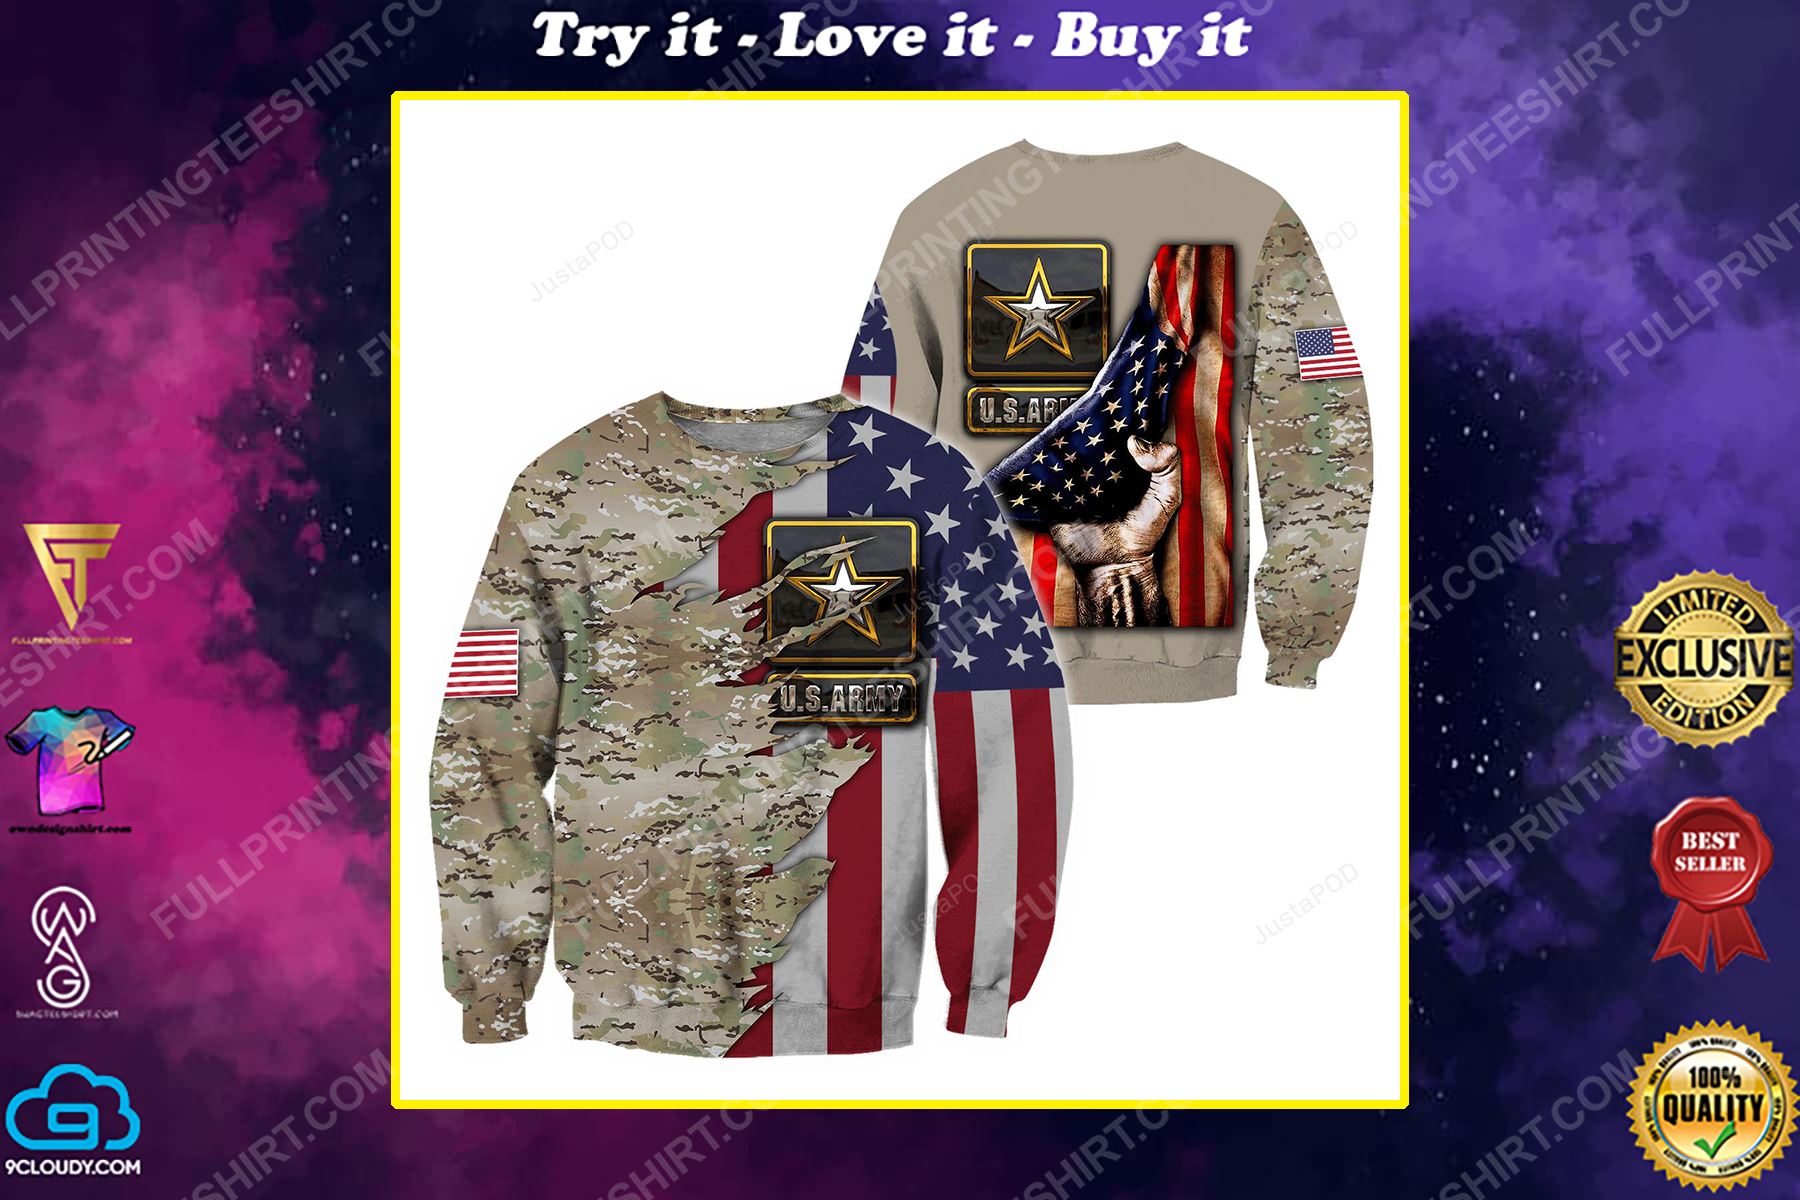 The united states army full print ugly christmas sweater